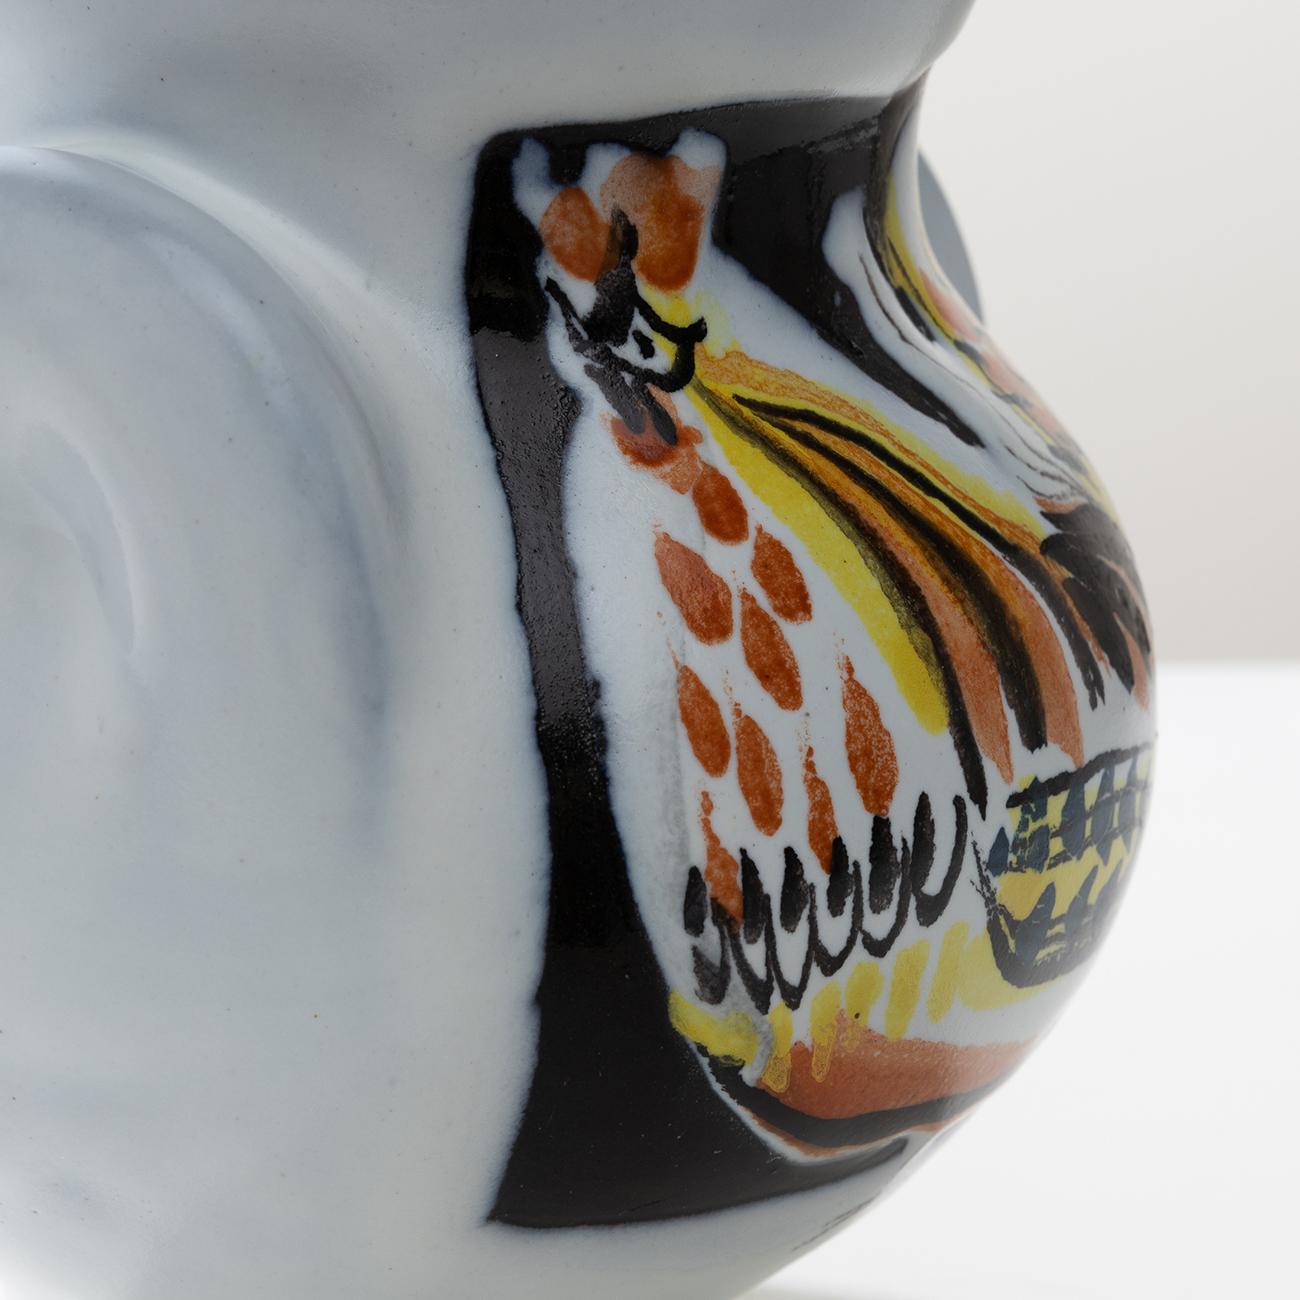 Mid-Century Modern Glazed Ceramic Ear Vase with Rooster Decoration by Roger Capron, Vallauris